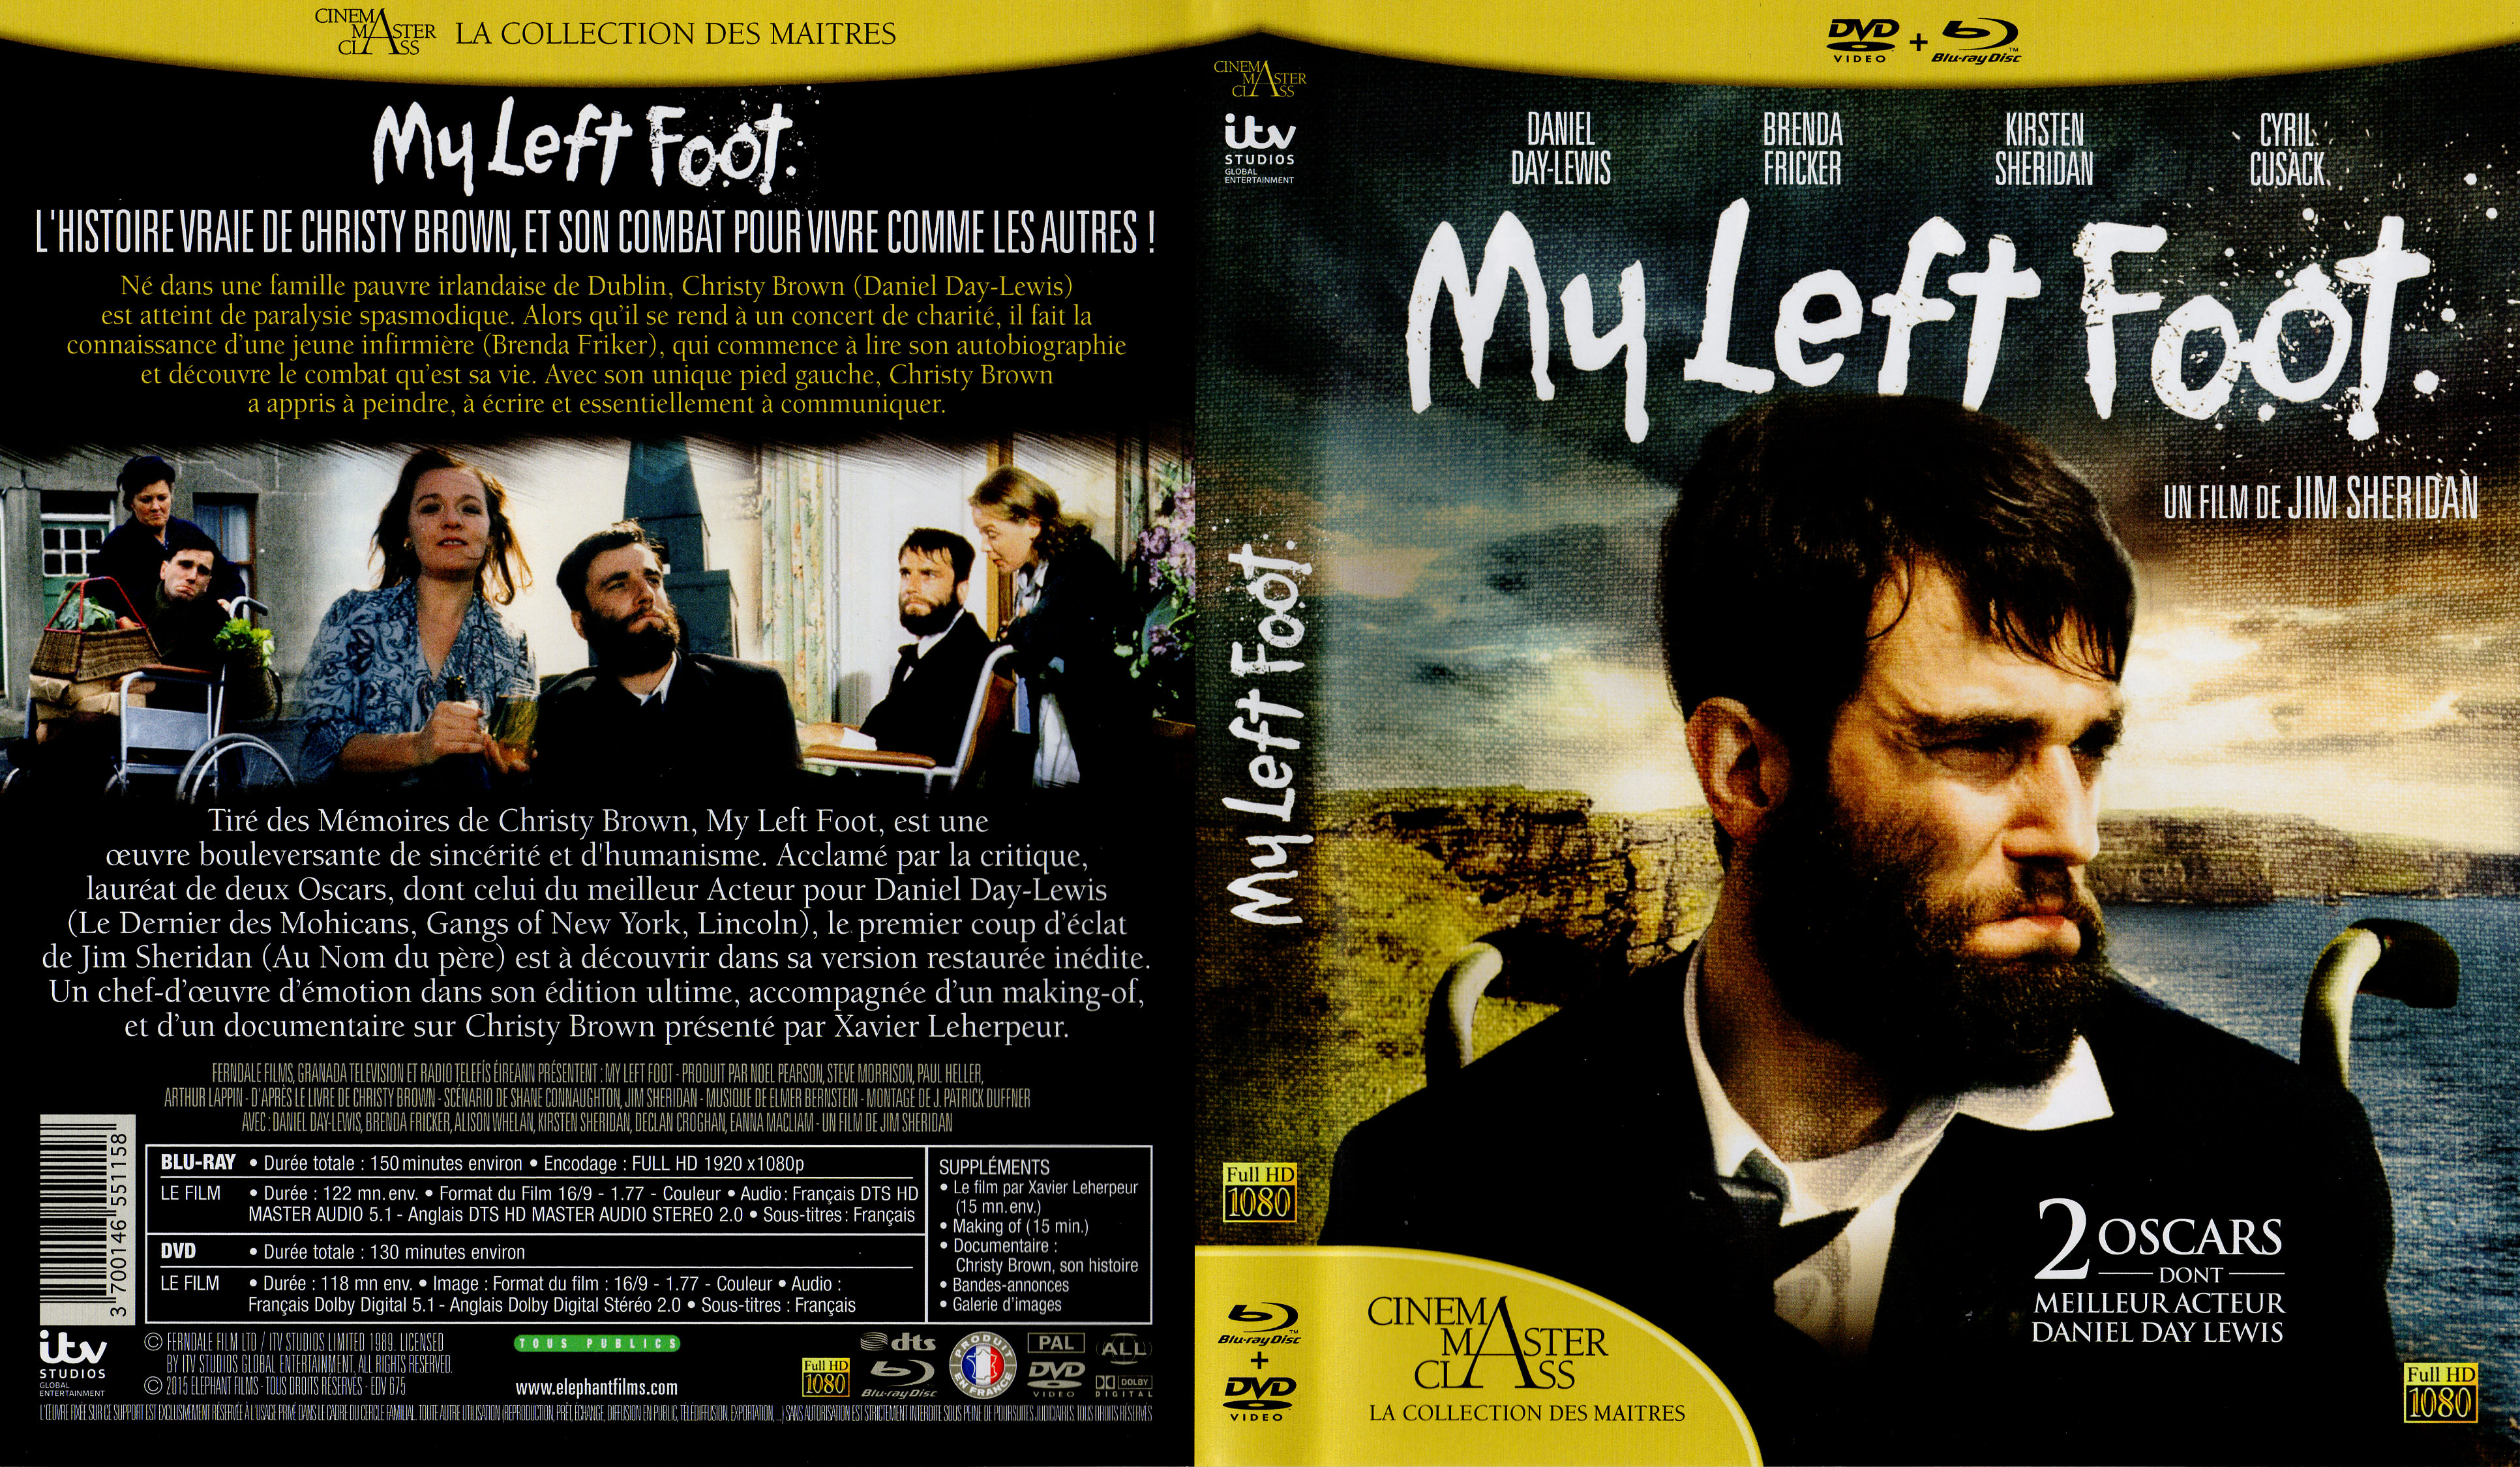 Jaquette DVD My left foot (BLU-RAY)